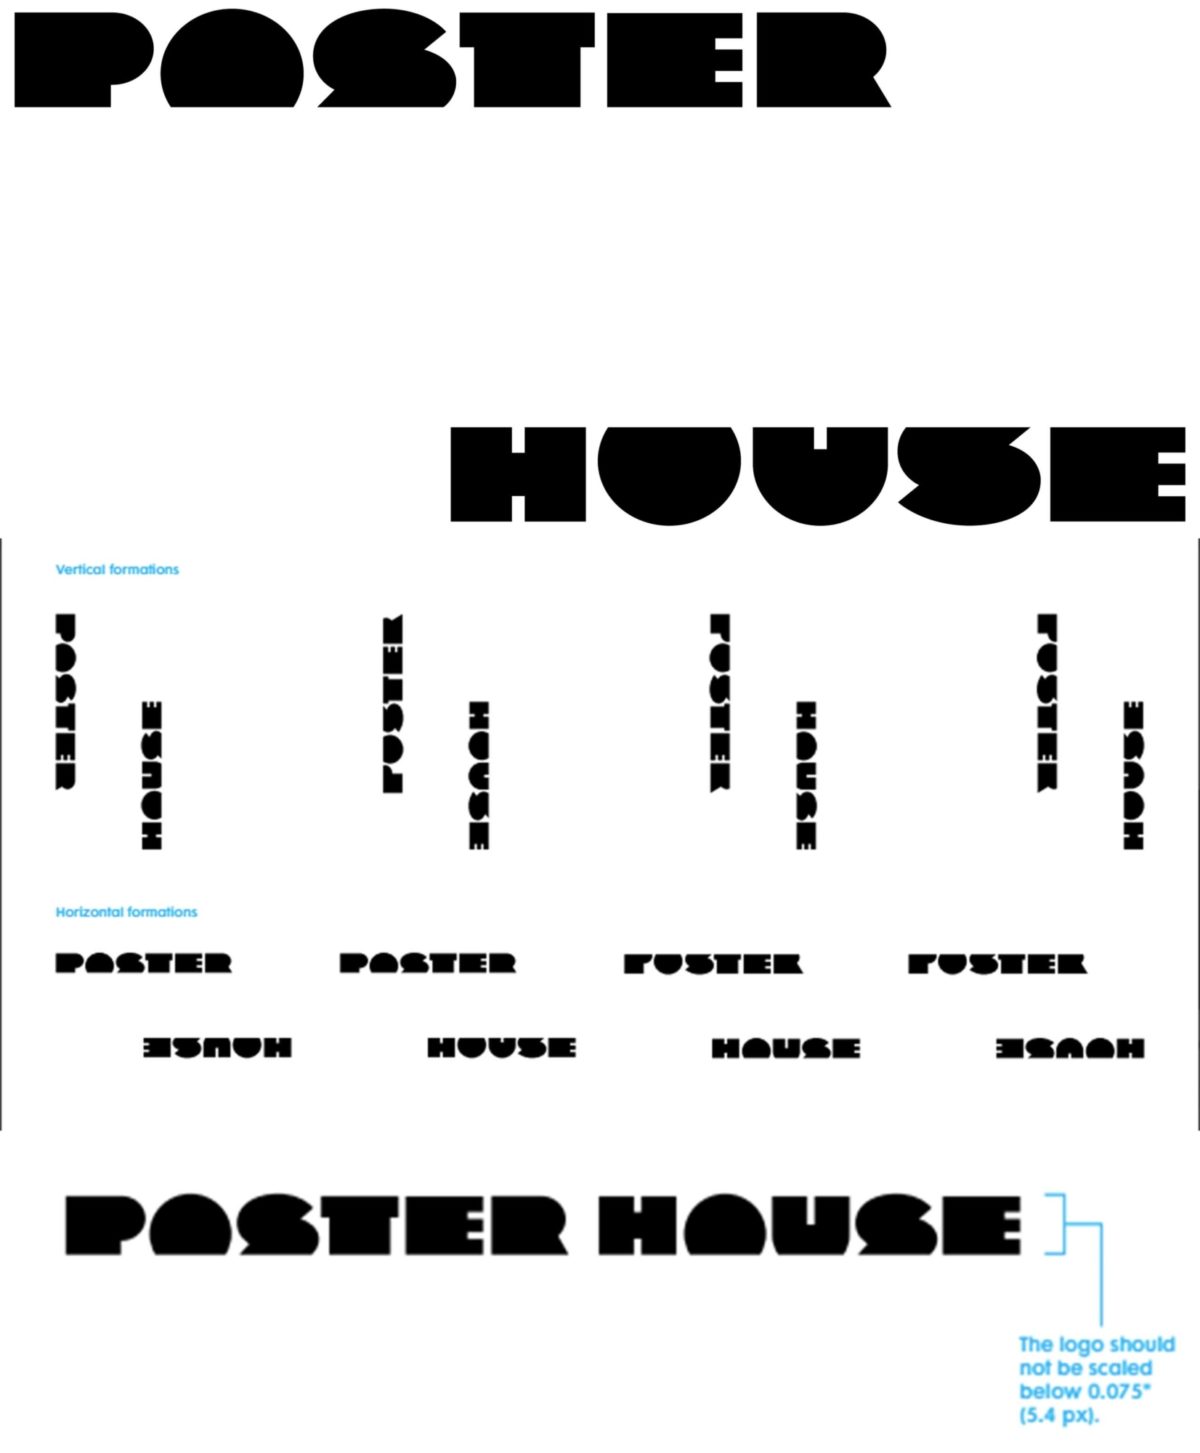 Many logos of Poster House with different font sizes and in different areas.